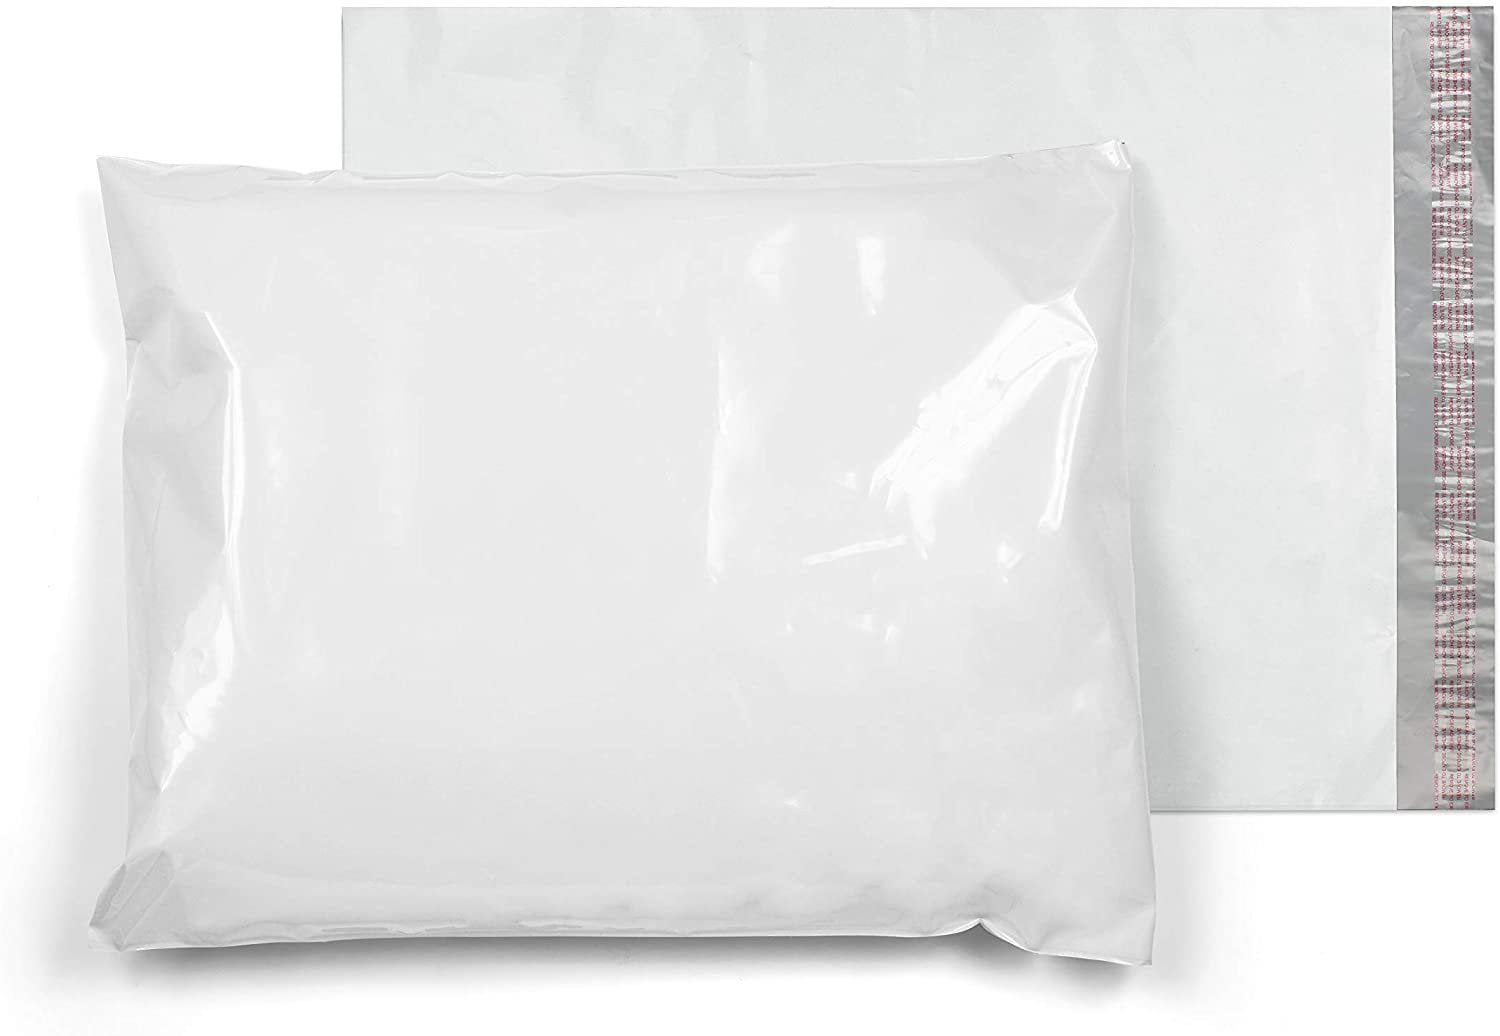 1000 10x13 Poly Mailer Plastic Shipping Mailing Bags Envelope Polybag 2.4 Mils 